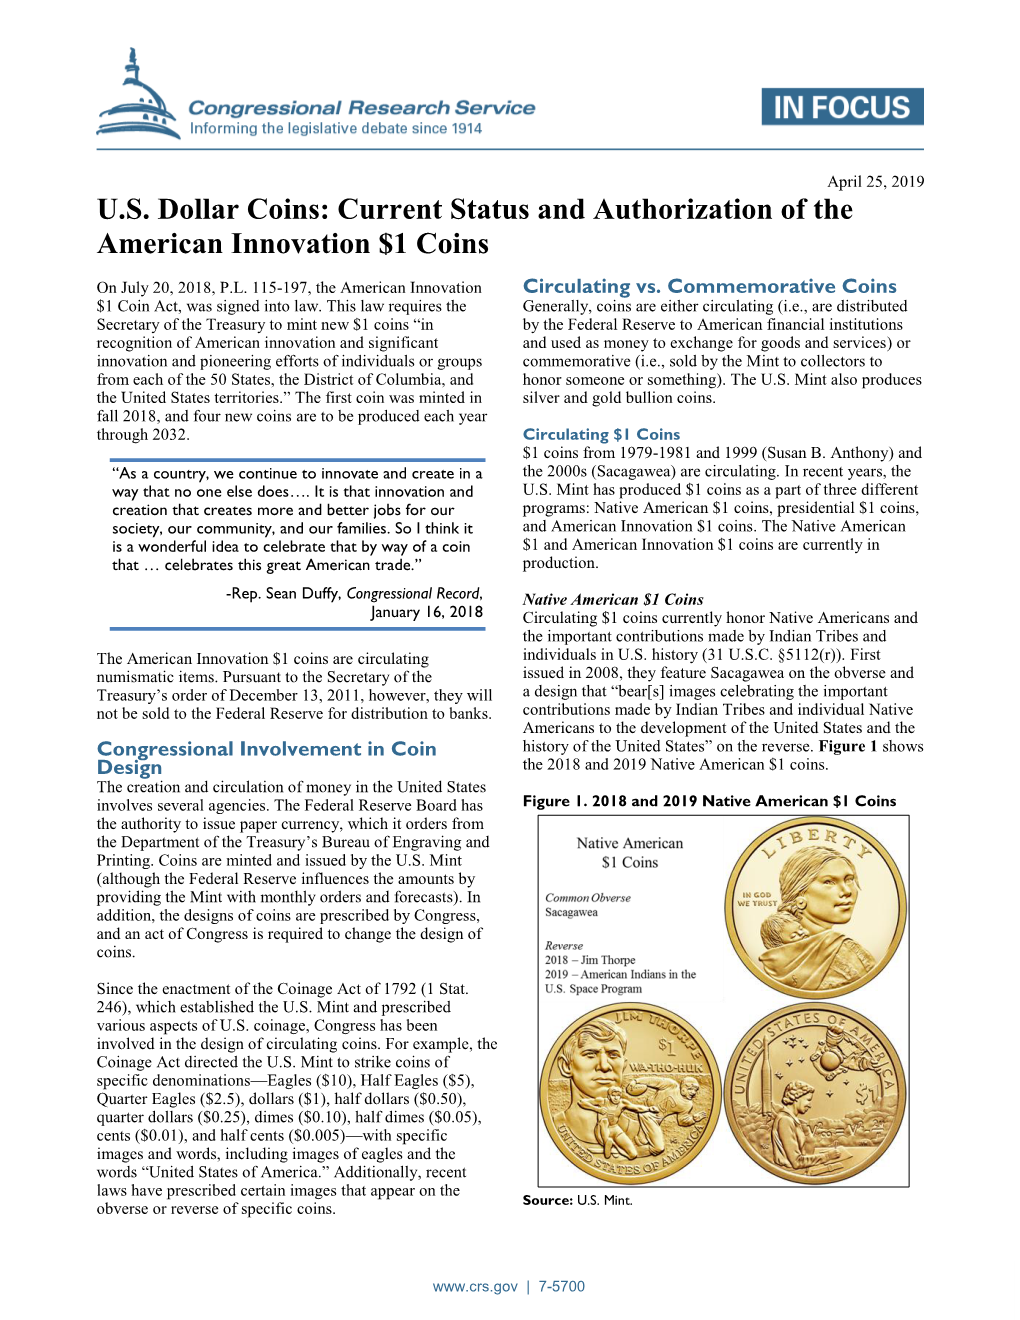 Current Status and Authorization of the American Innovation $1 Coins